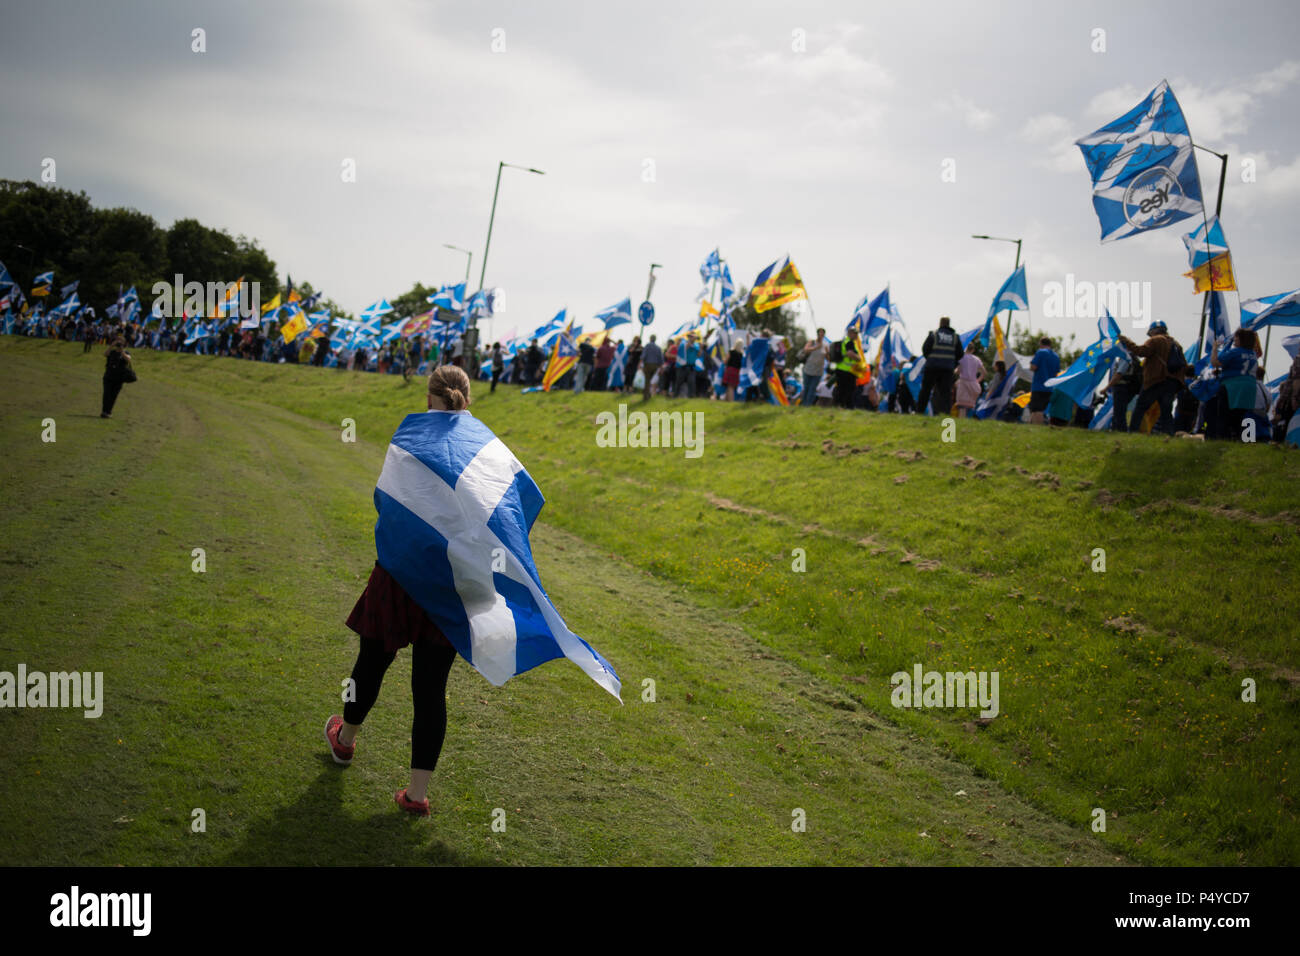 Stirling, Scotland, UK. 23rd June 2018.  Pro-Scottish Independence march, organised in the 'All Under One Banner' name, through the streets and to the battlefield in Bannockburn on the 704th anniverary of the Battle of Bannockburn. It was estimated that 10,000 people took part in the march calling for a second independence referendum. Photo credit Jeremy Sutton-Hibbert/Alamy Live News. Stock Photo